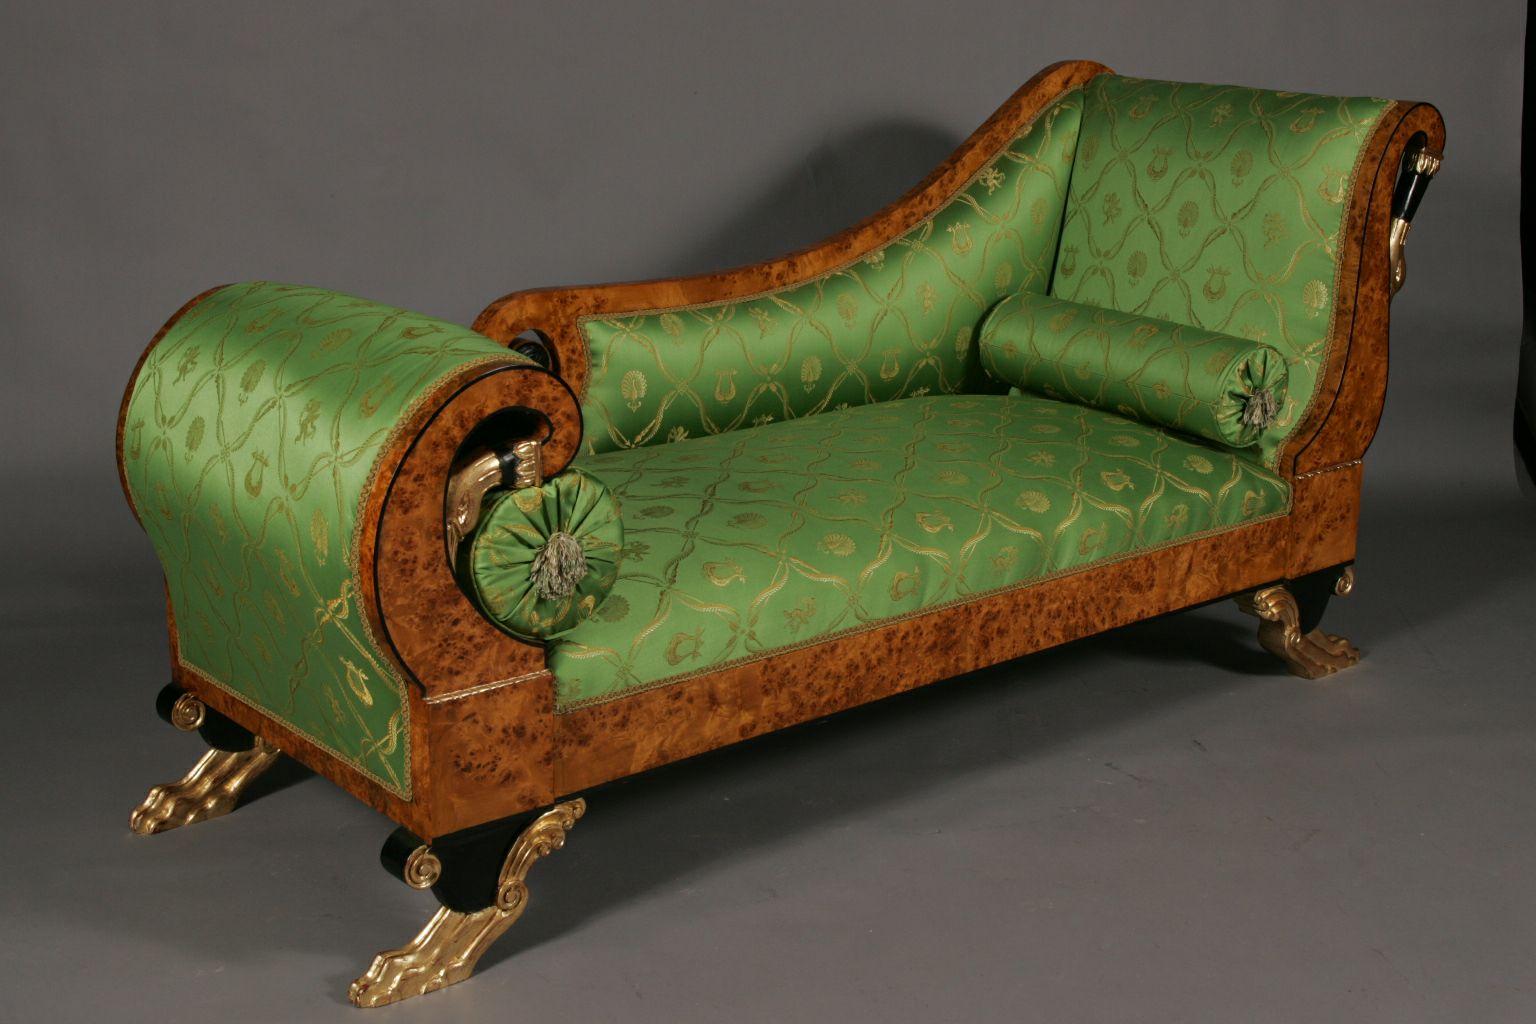 20th Century Empire Swan Chaise Longue/Sofa Lounge

Empire swan chaise longue in the style of Classizism.
Maple roots on solid beechwood, partially ebonized and gilded.
Literature Proven: Battenberg (Renate Moeller, p. 83).

delivery time is